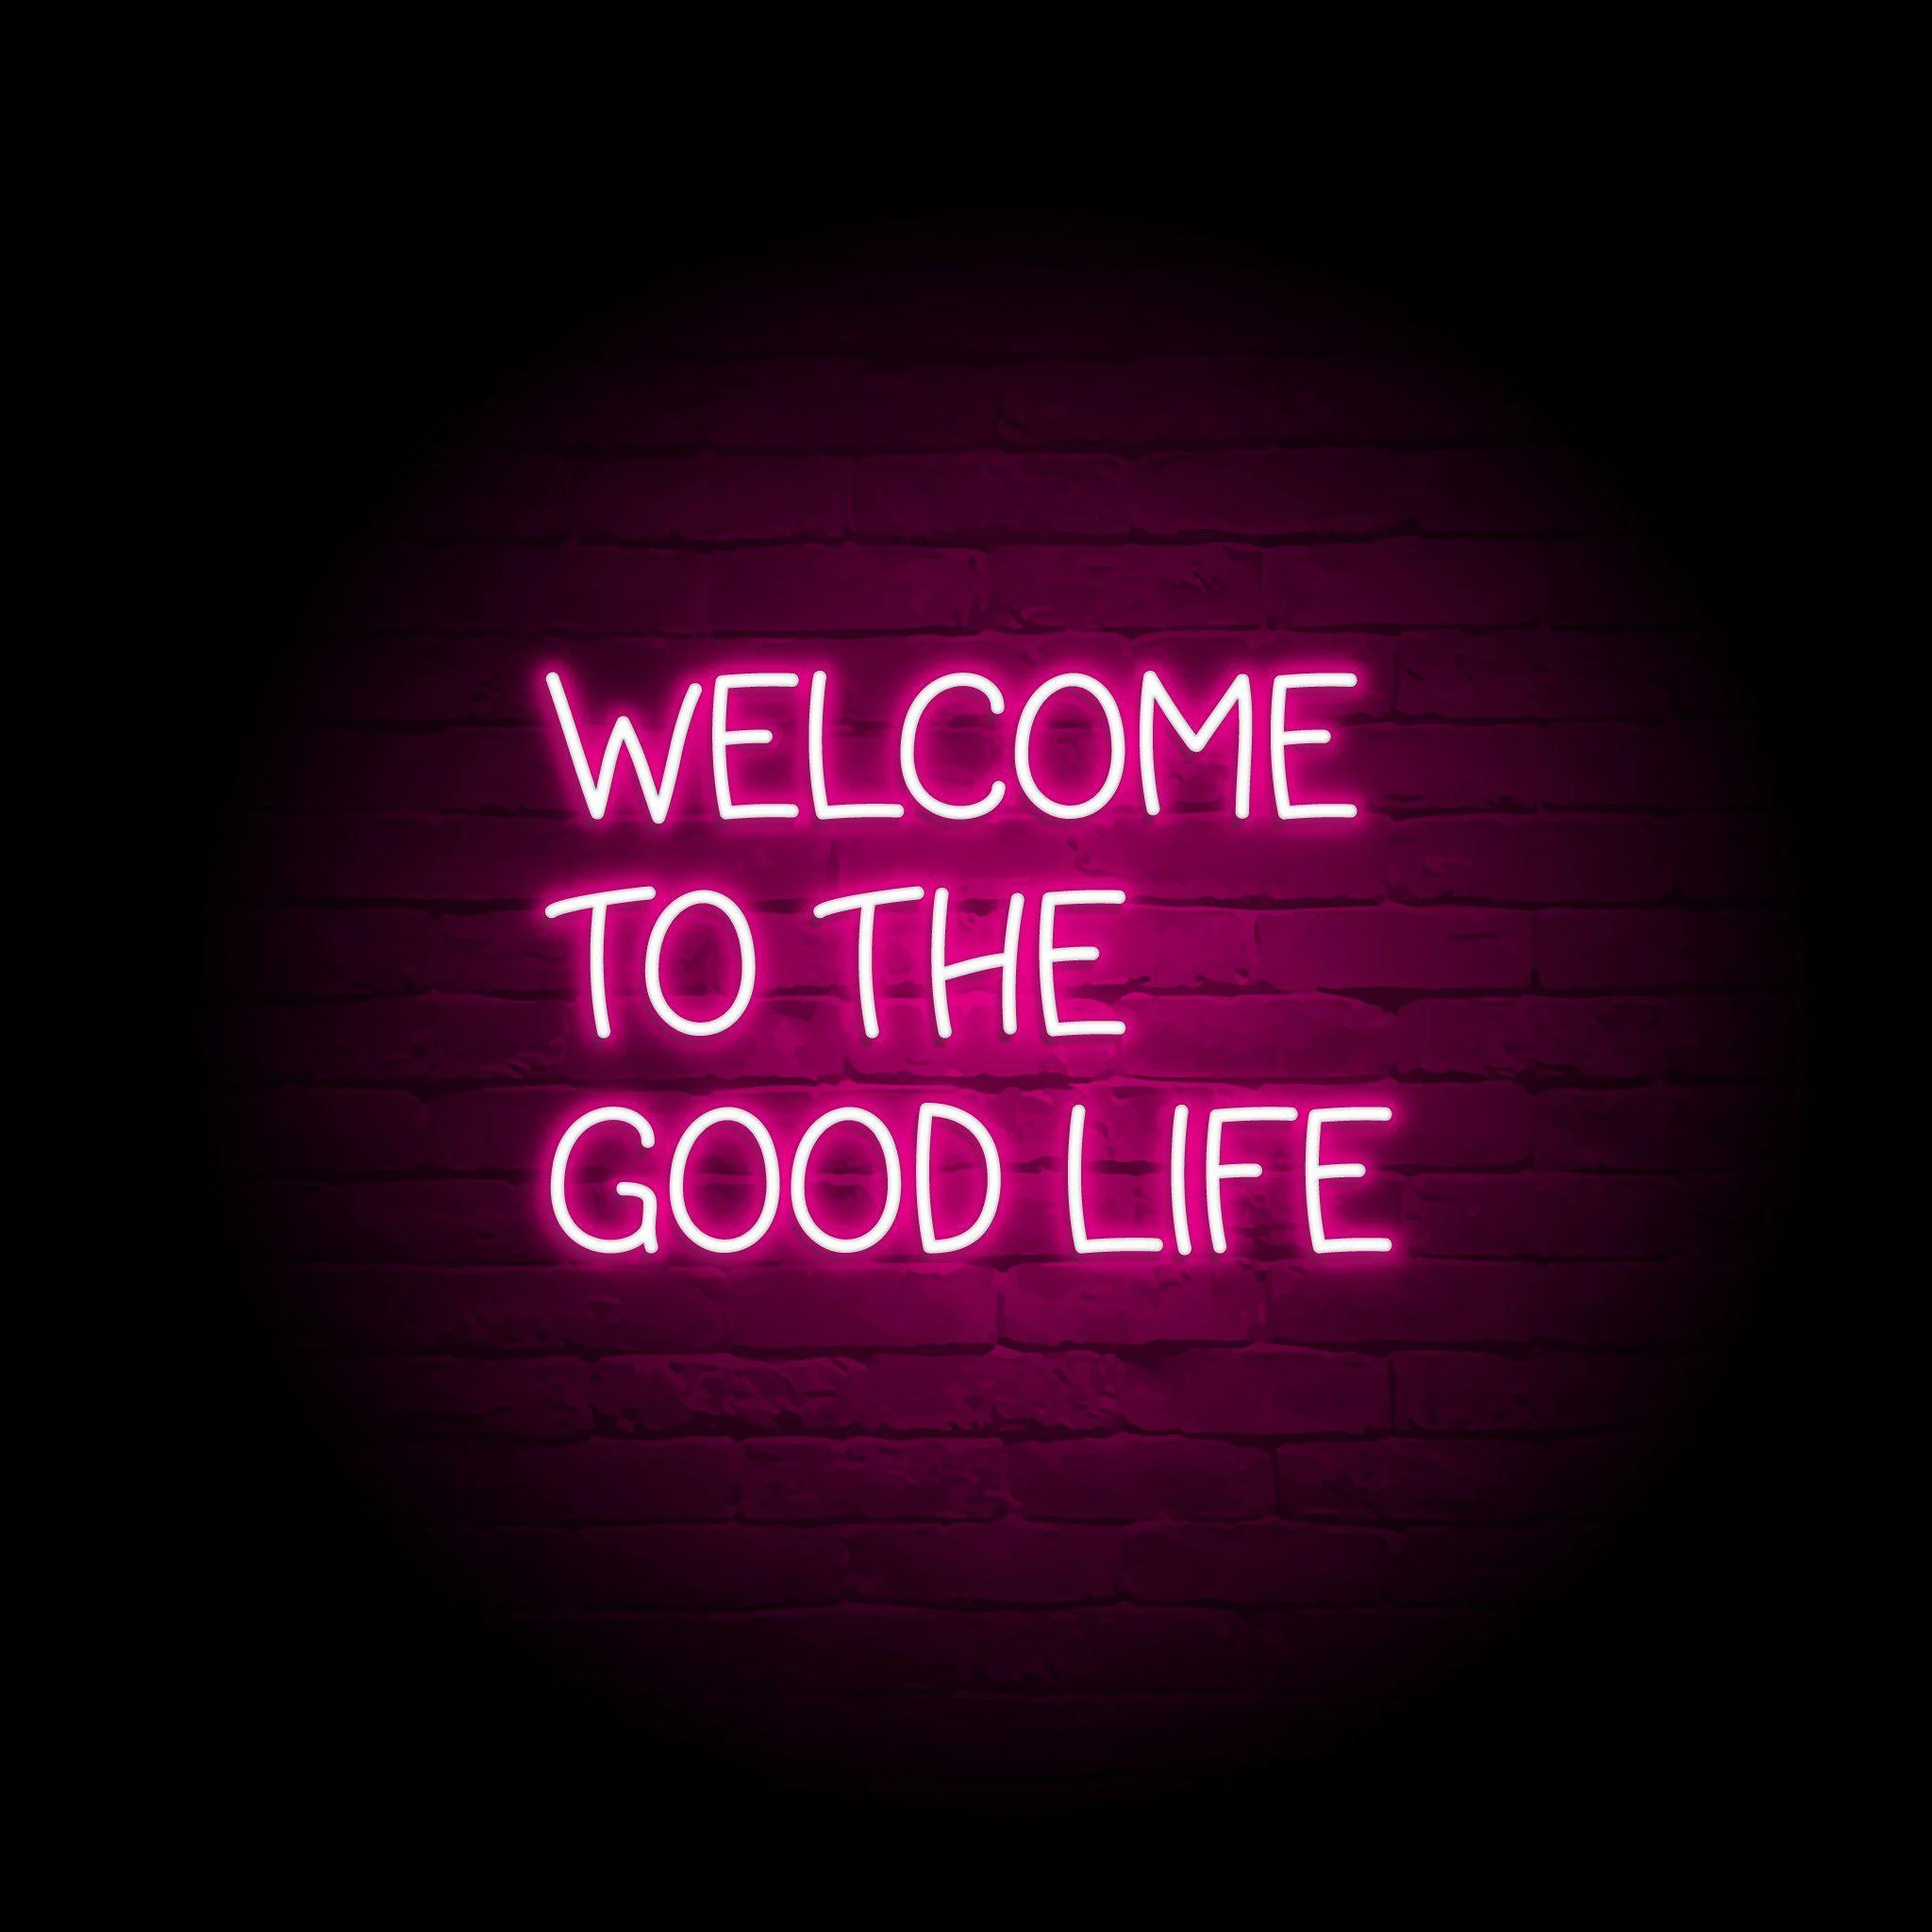 'WELCOME TO THE GOOD LIFE' NEON SIGN